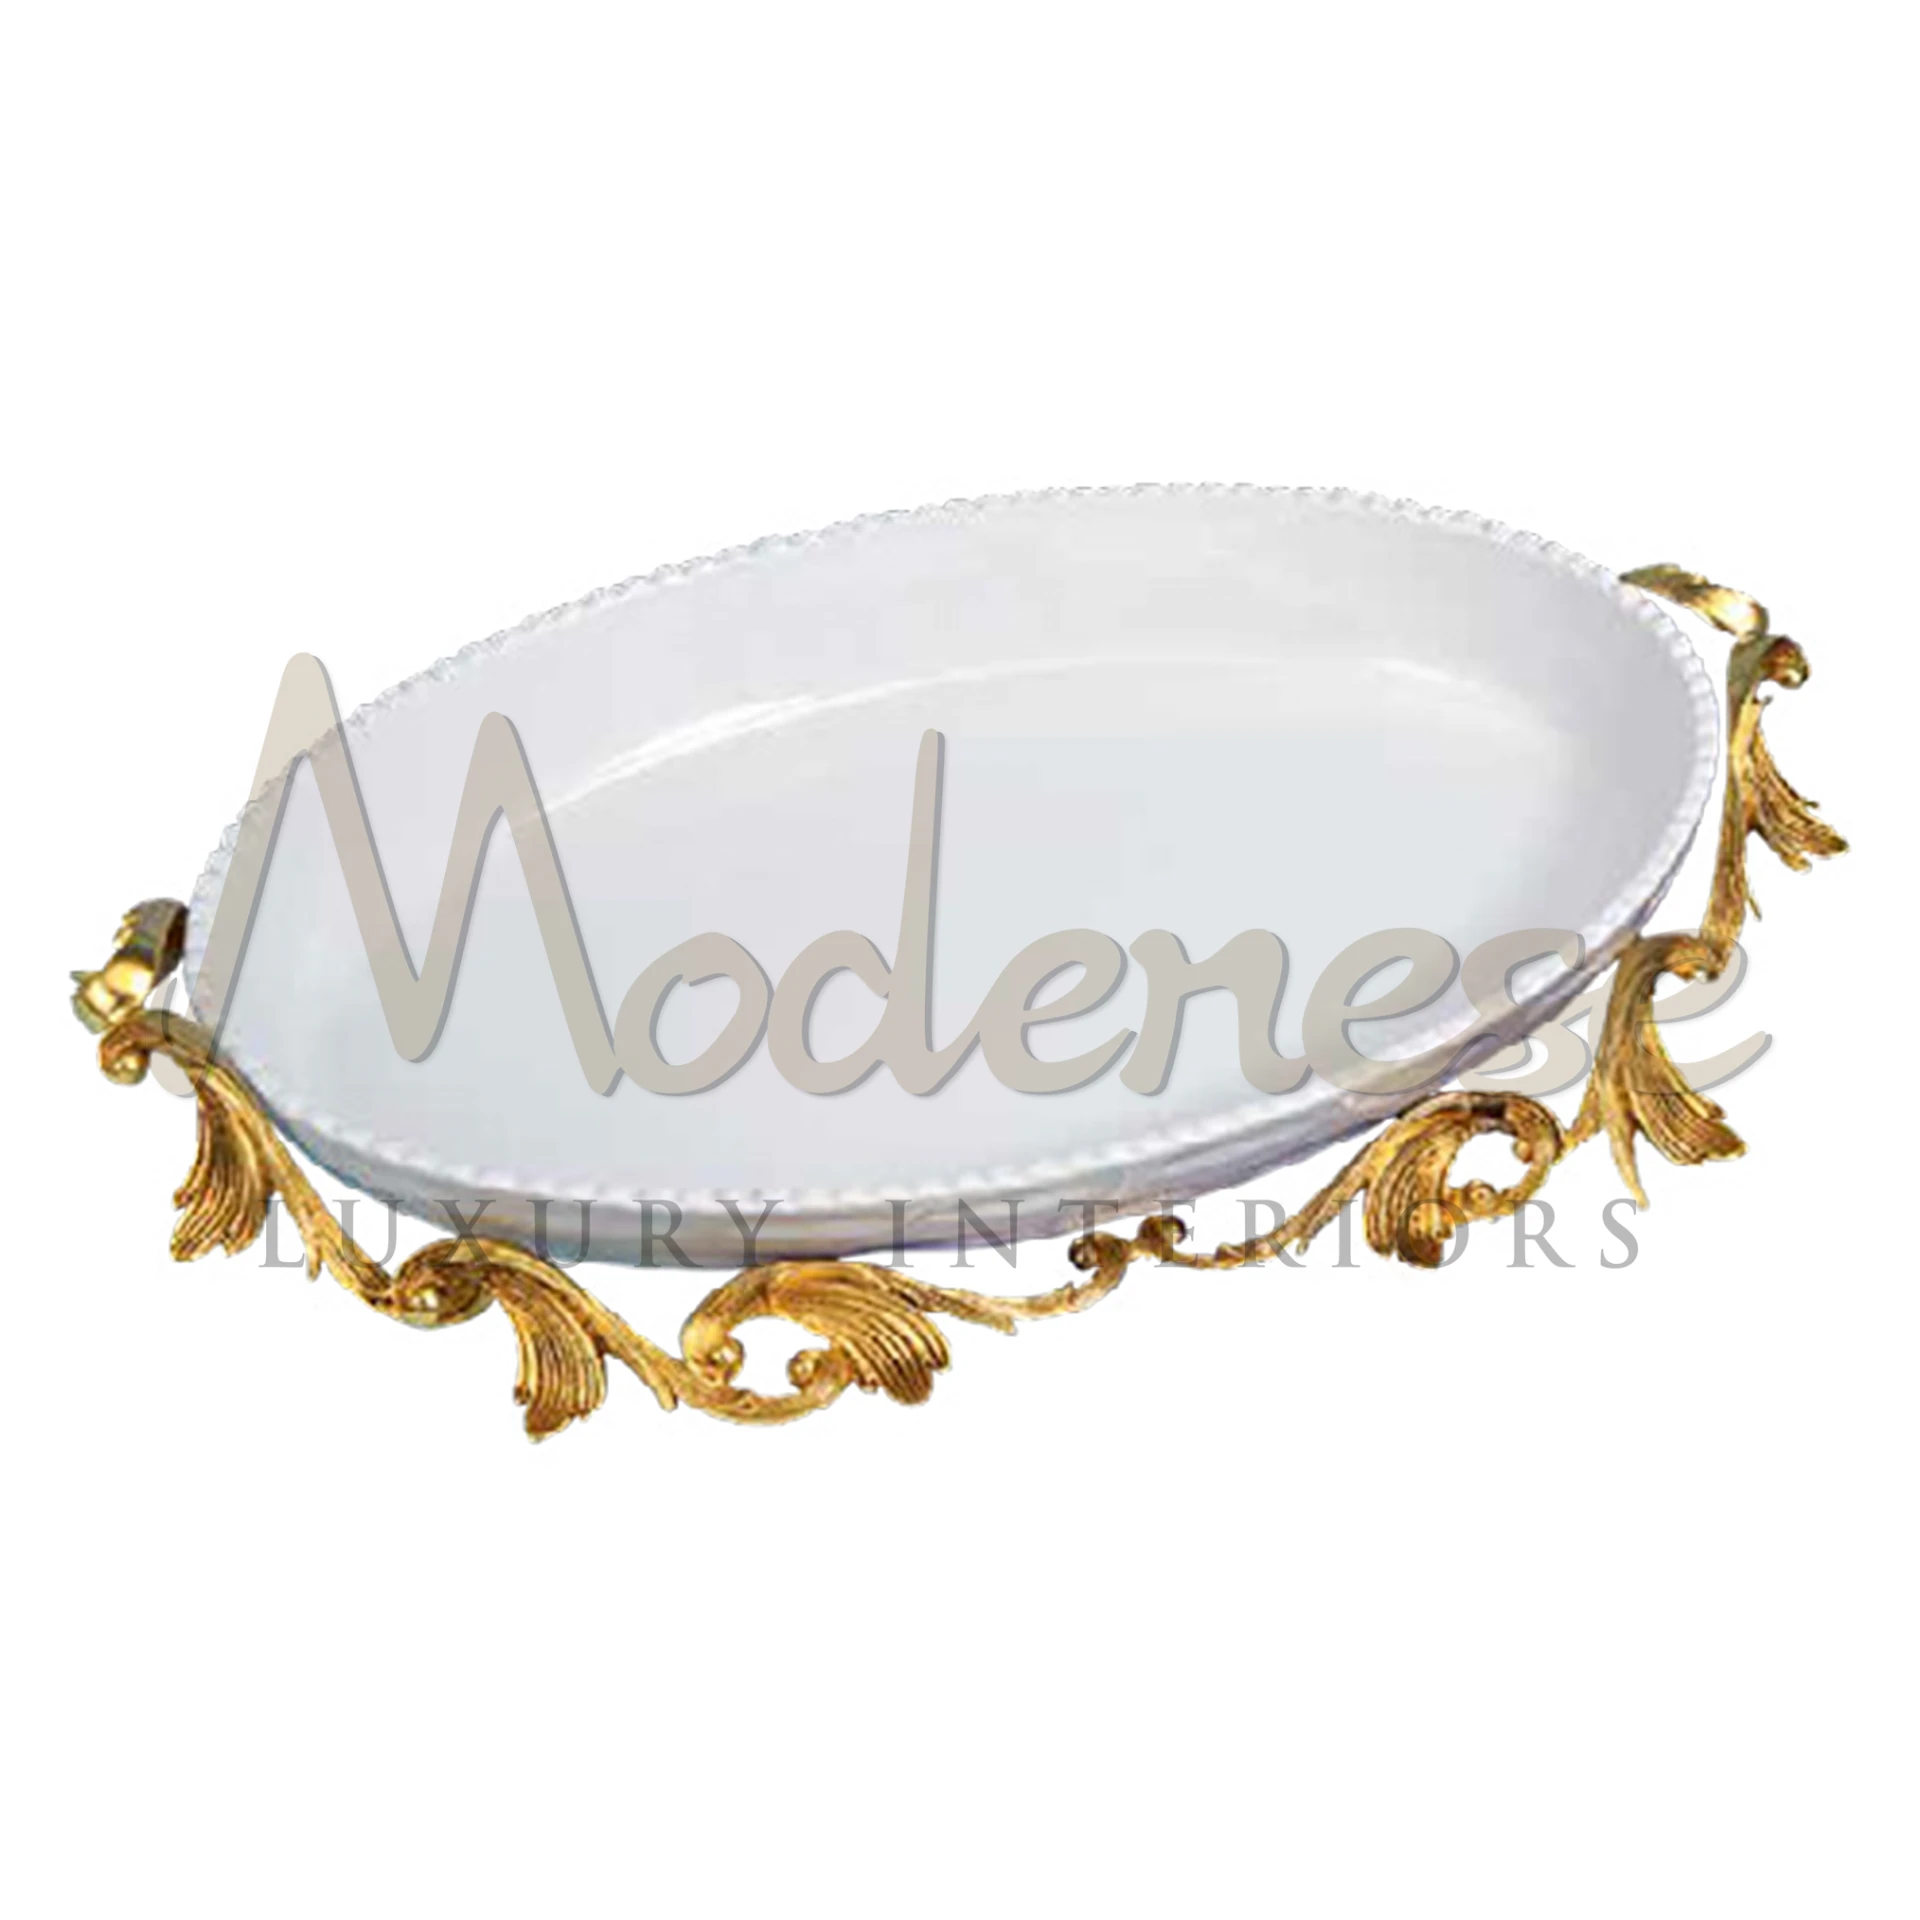 White oval serving plate with gold-colored handles